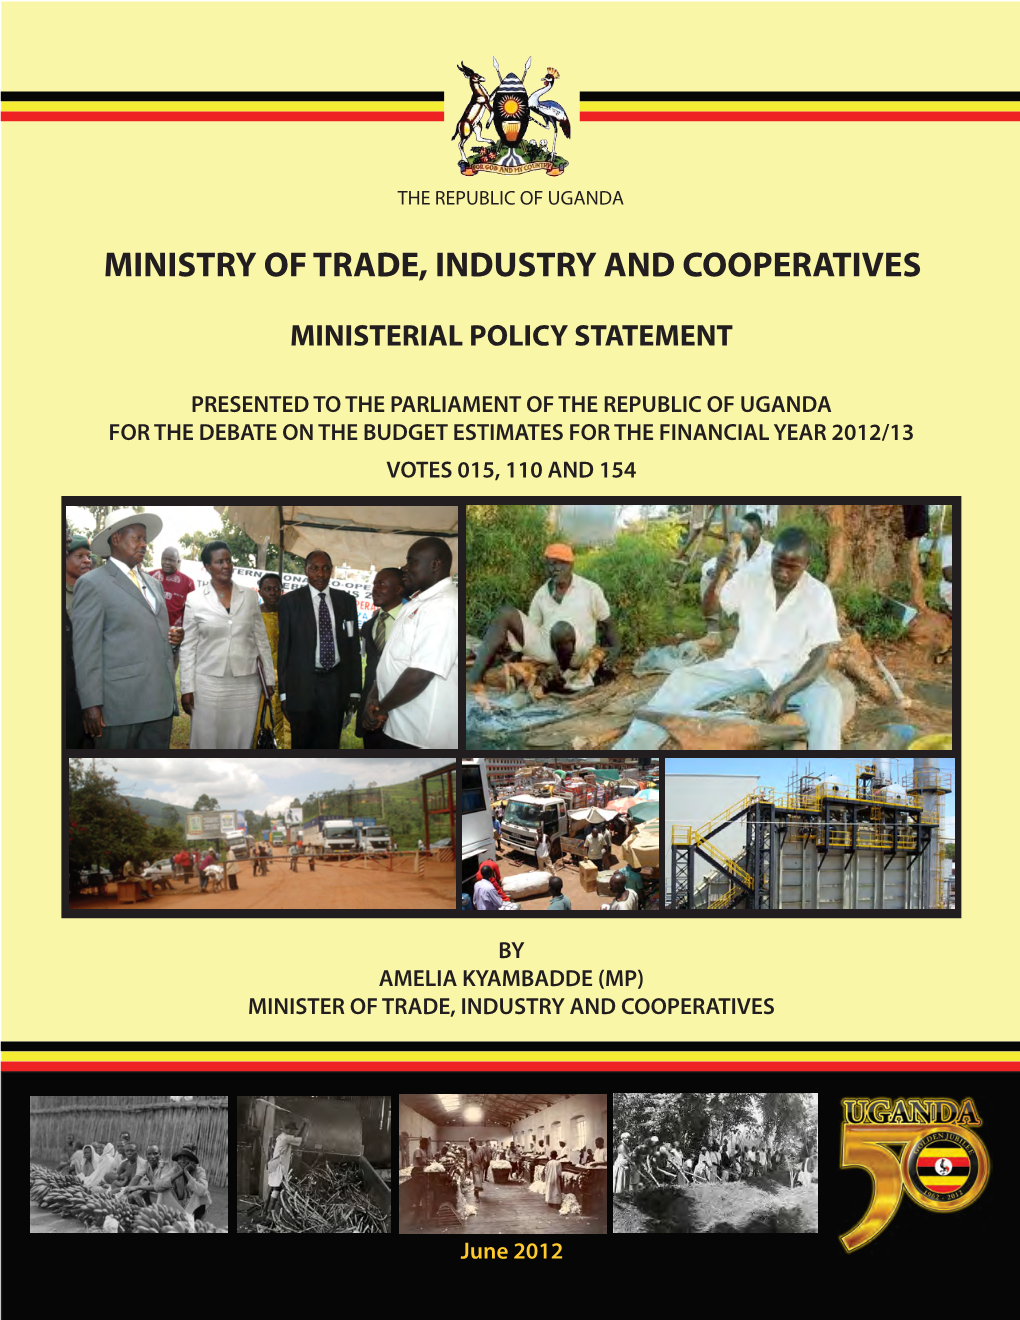 Ministerial Policy Statement